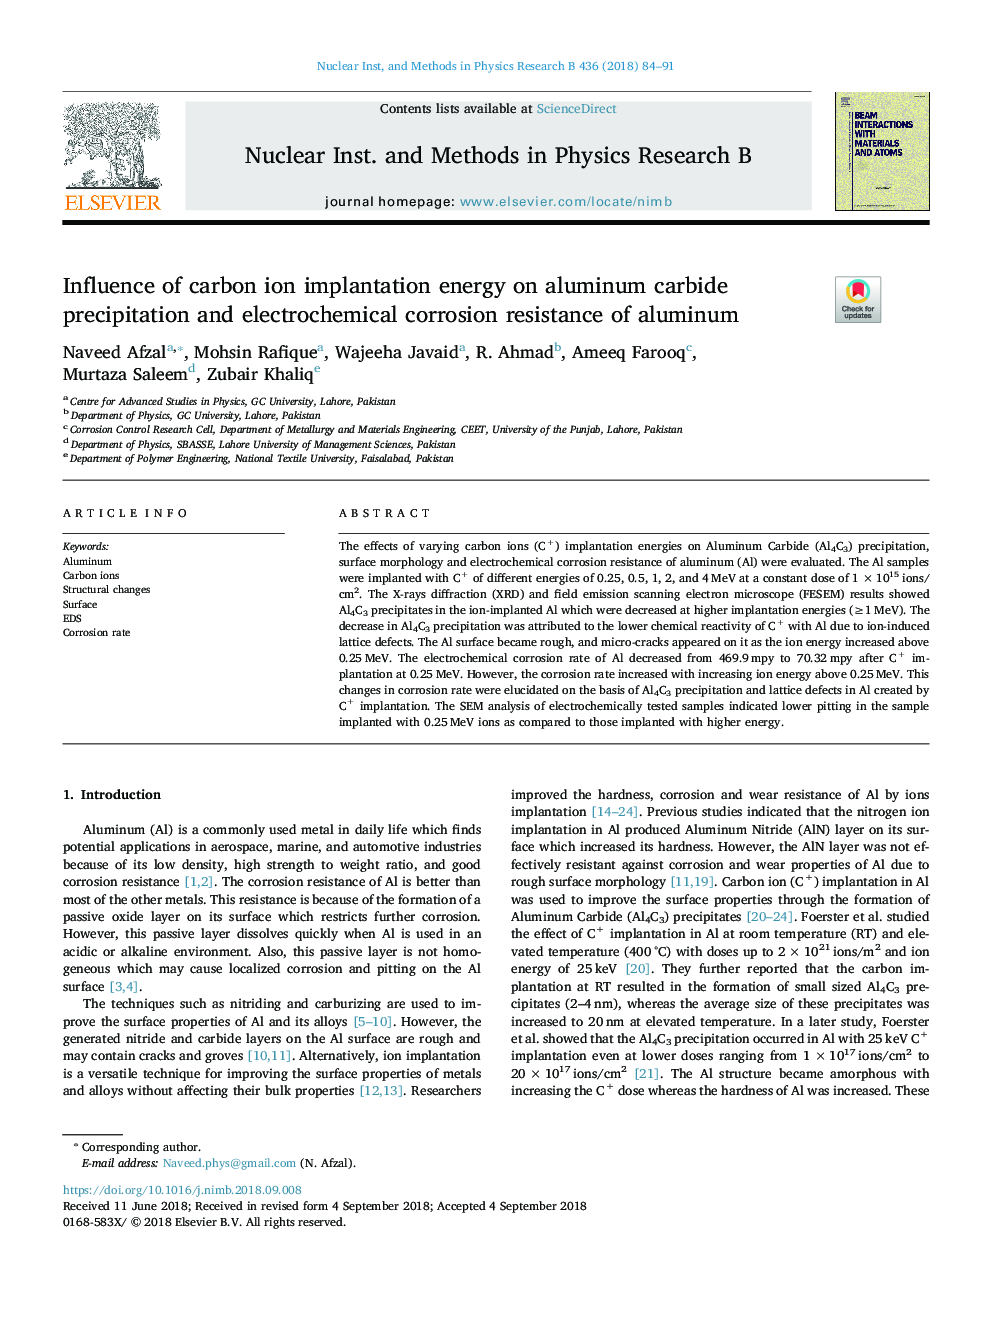 Influence of carbon ion implantation energy on aluminum carbide precipitation and electrochemical corrosion resistance of aluminum